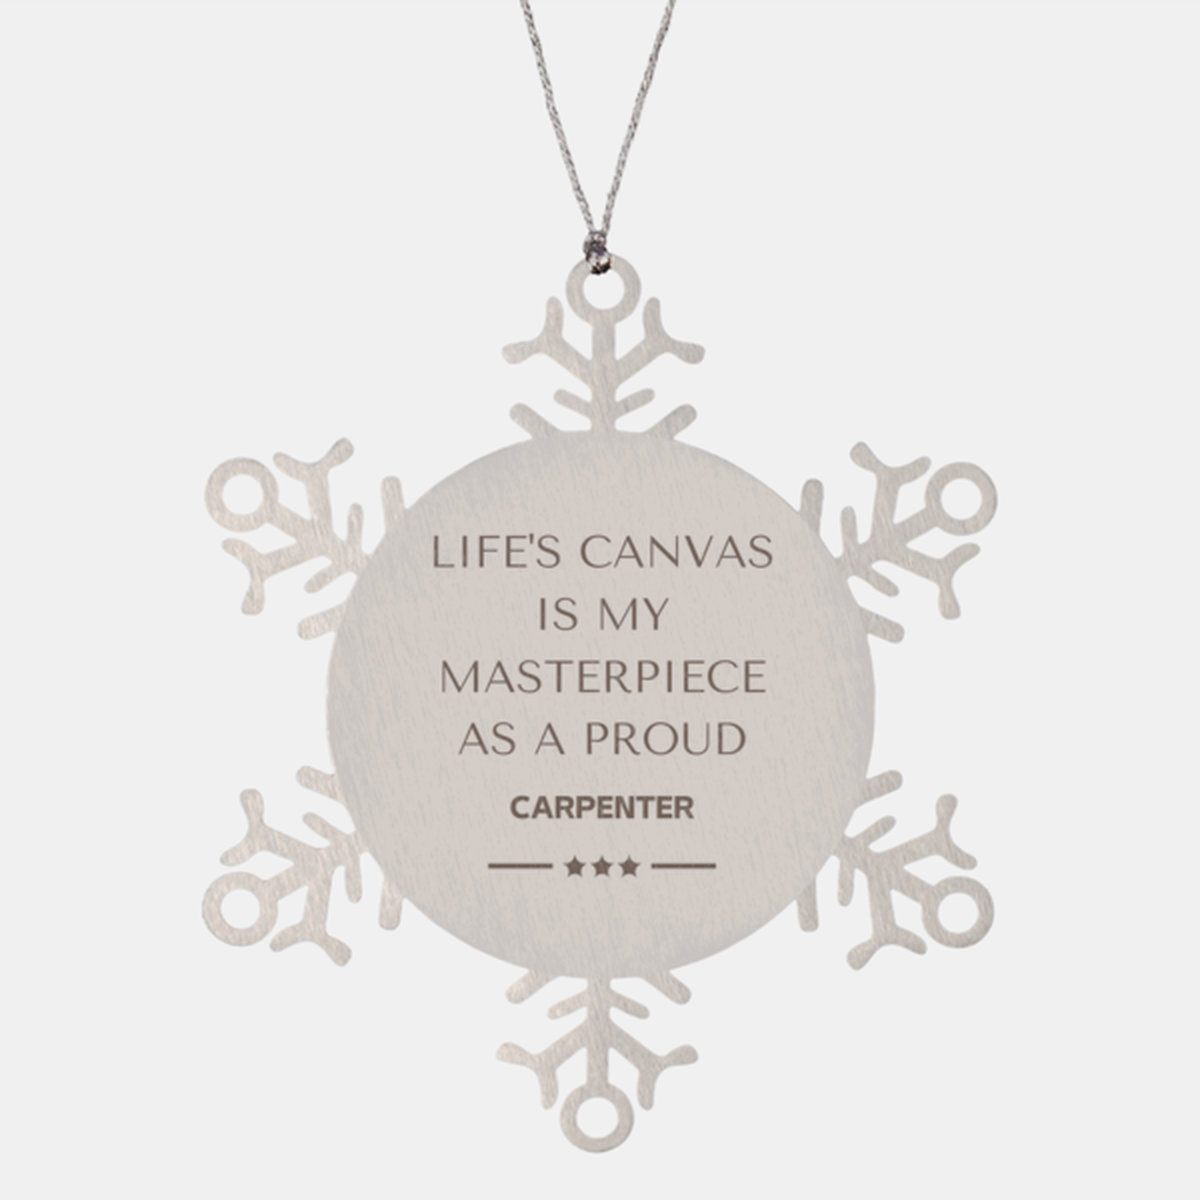 Proud Carpenter Gifts, Life's canvas is my masterpiece, Epic Birthday Christmas Unique Snowflake Ornament For Carpenter, Coworkers, Men, Women, Friends